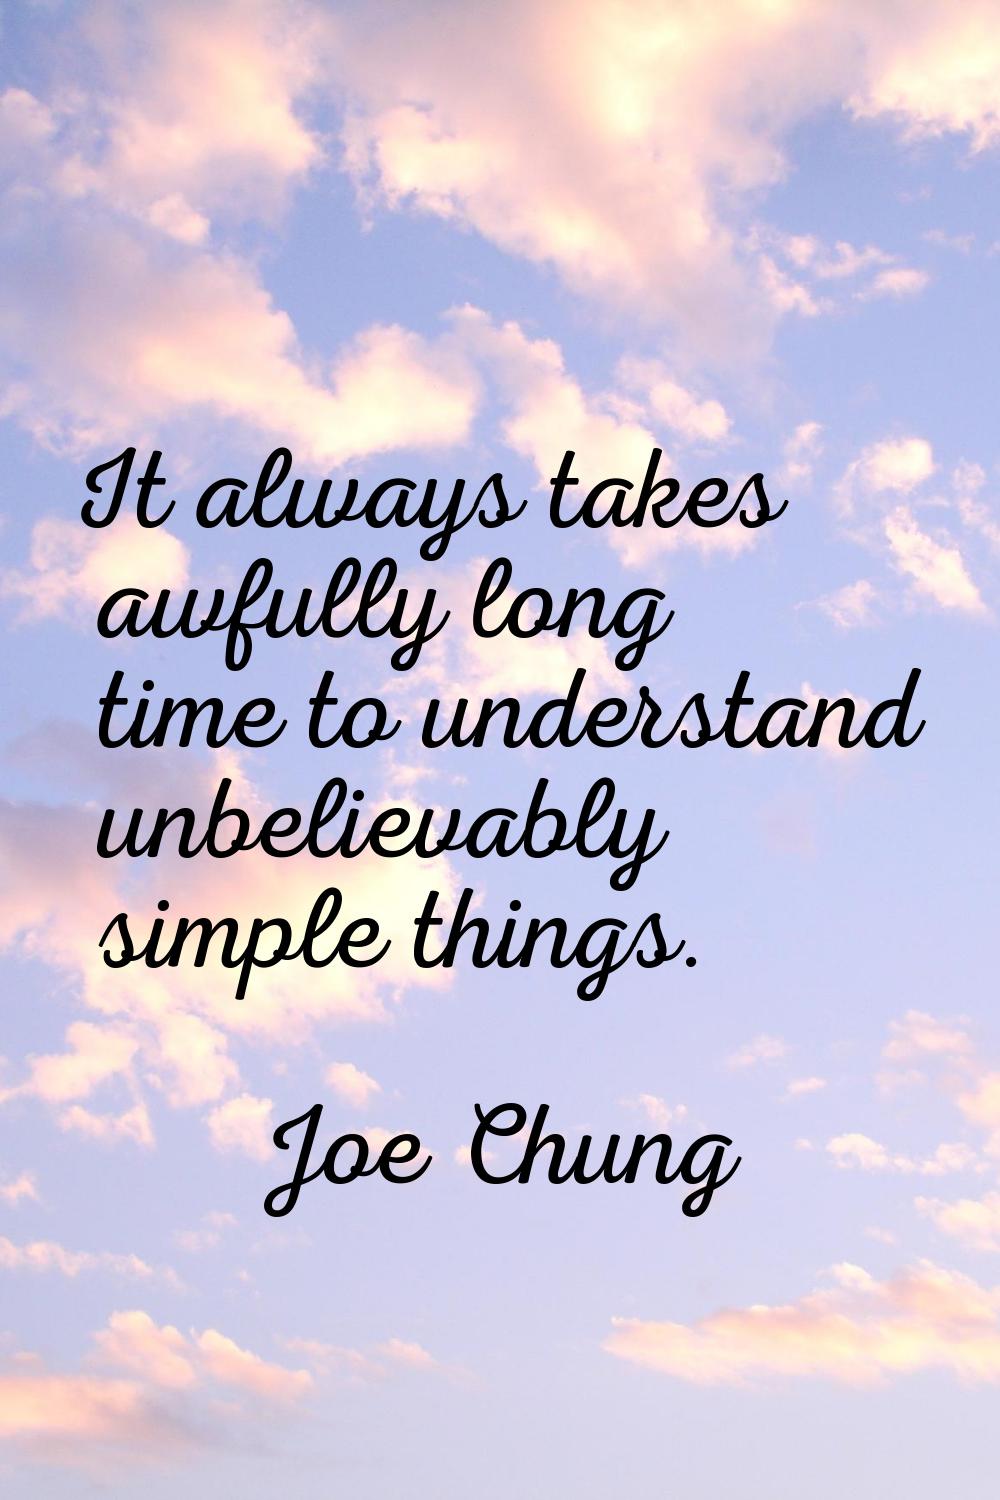 It always takes awfully long time to understand unbelievably simple things.